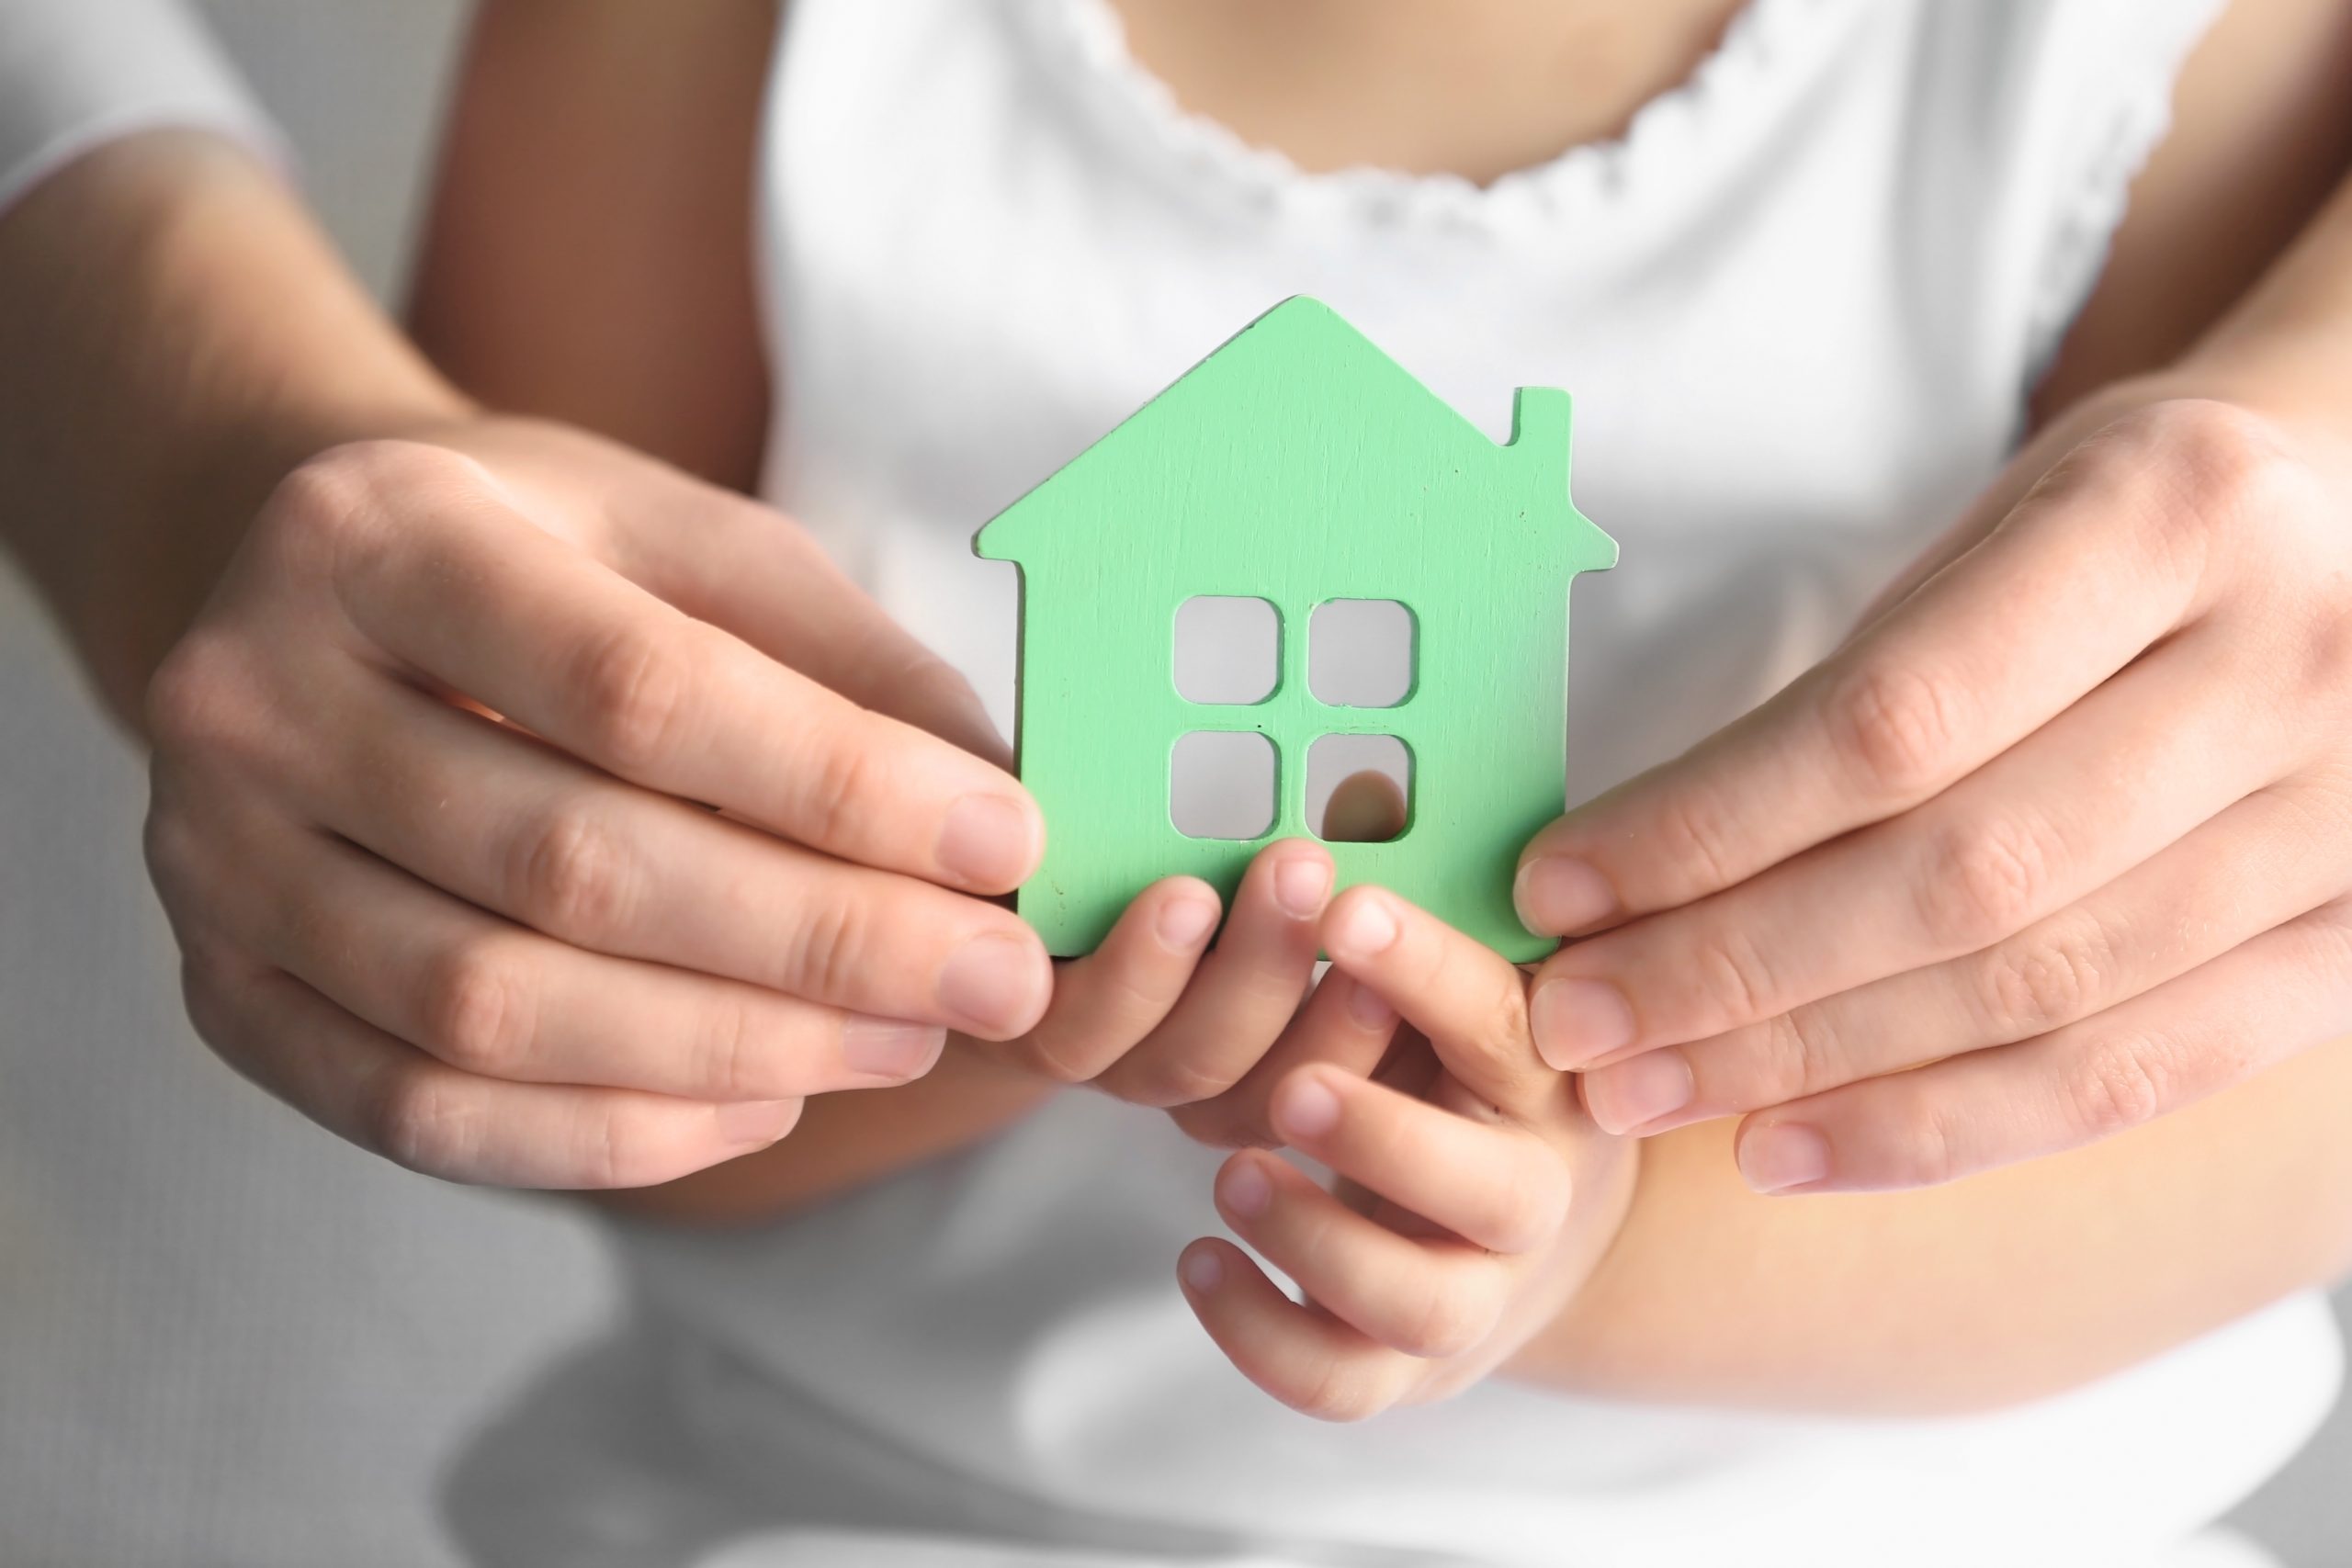 An adult and a child hold a small green home together in their joined, cupped hands.